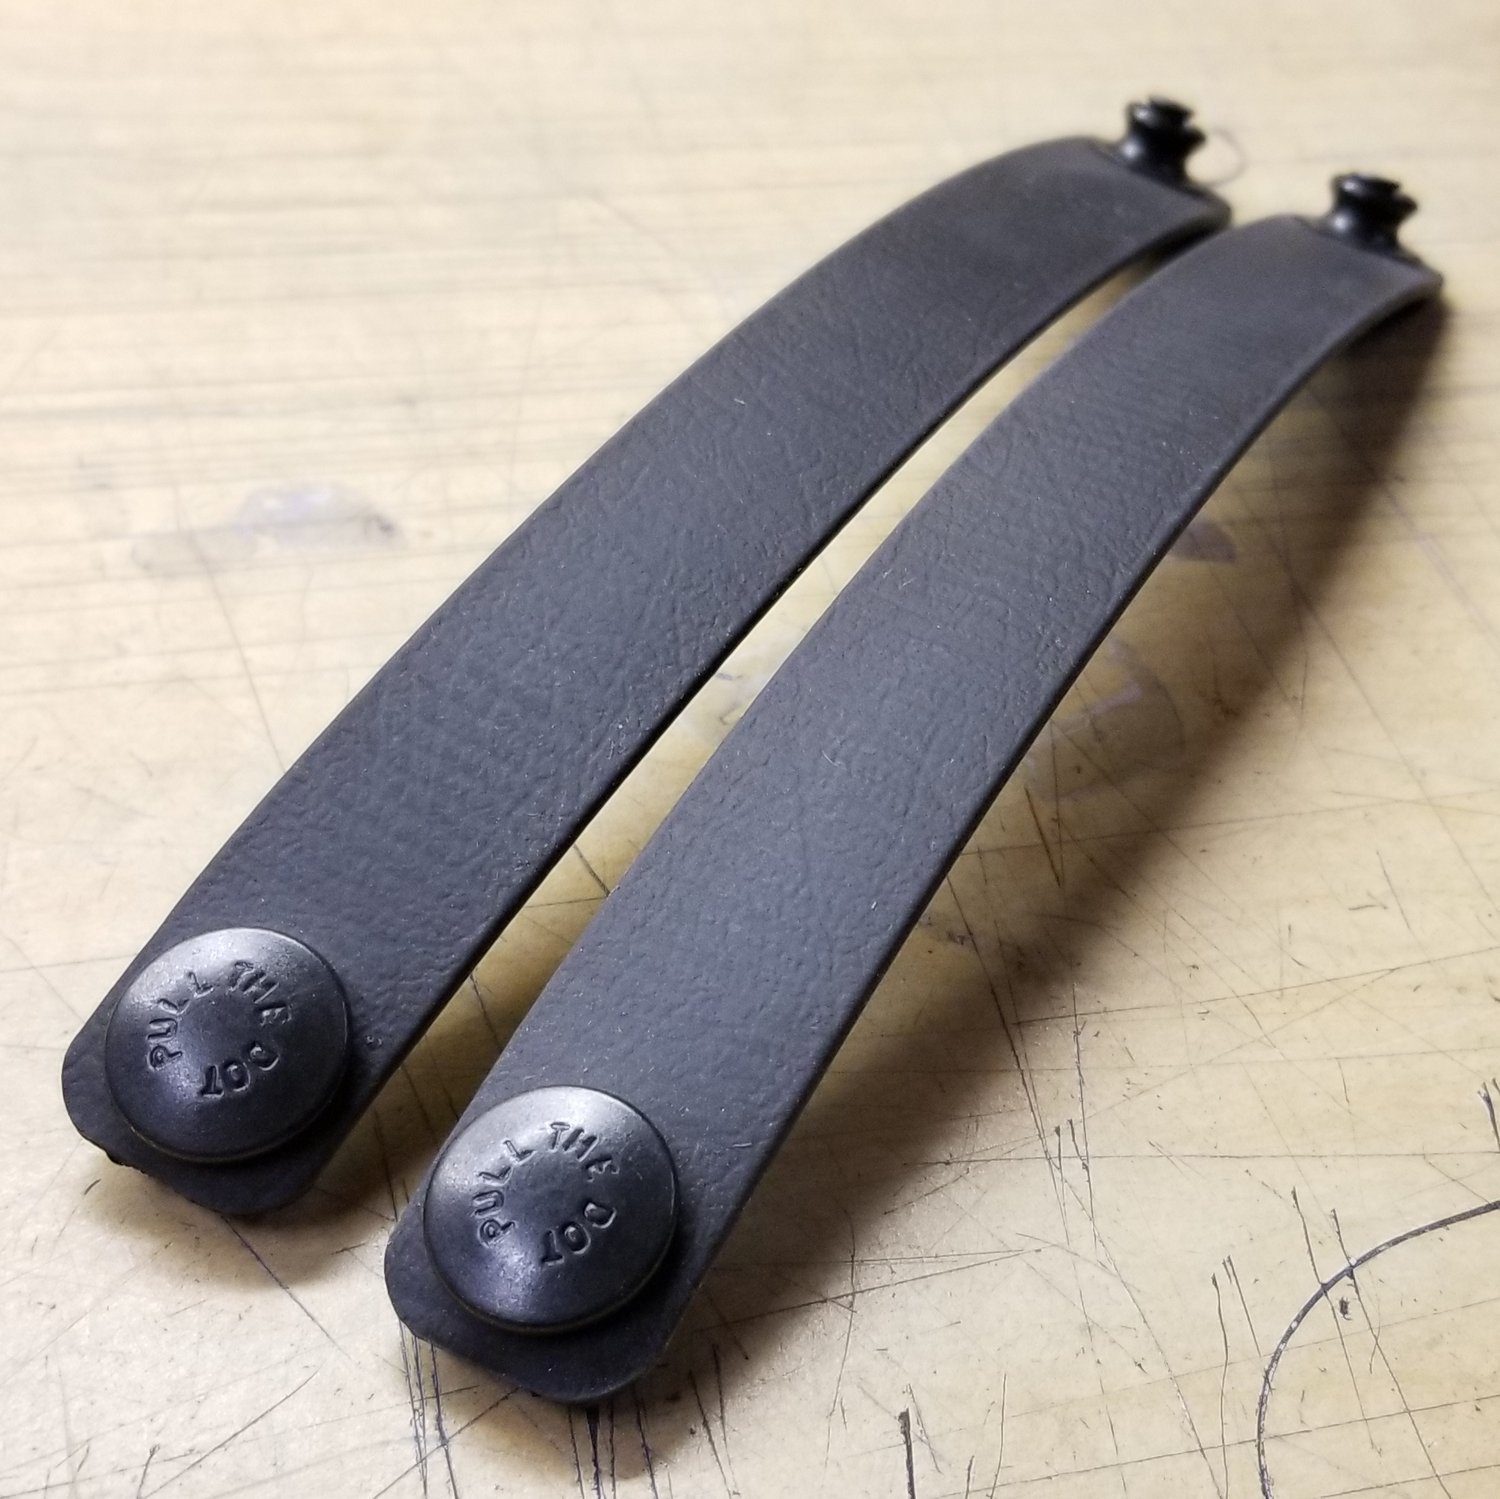 Horizontal Carry Soft Loop Option for the Folsom Necker (knife and Kydex sheath not included)